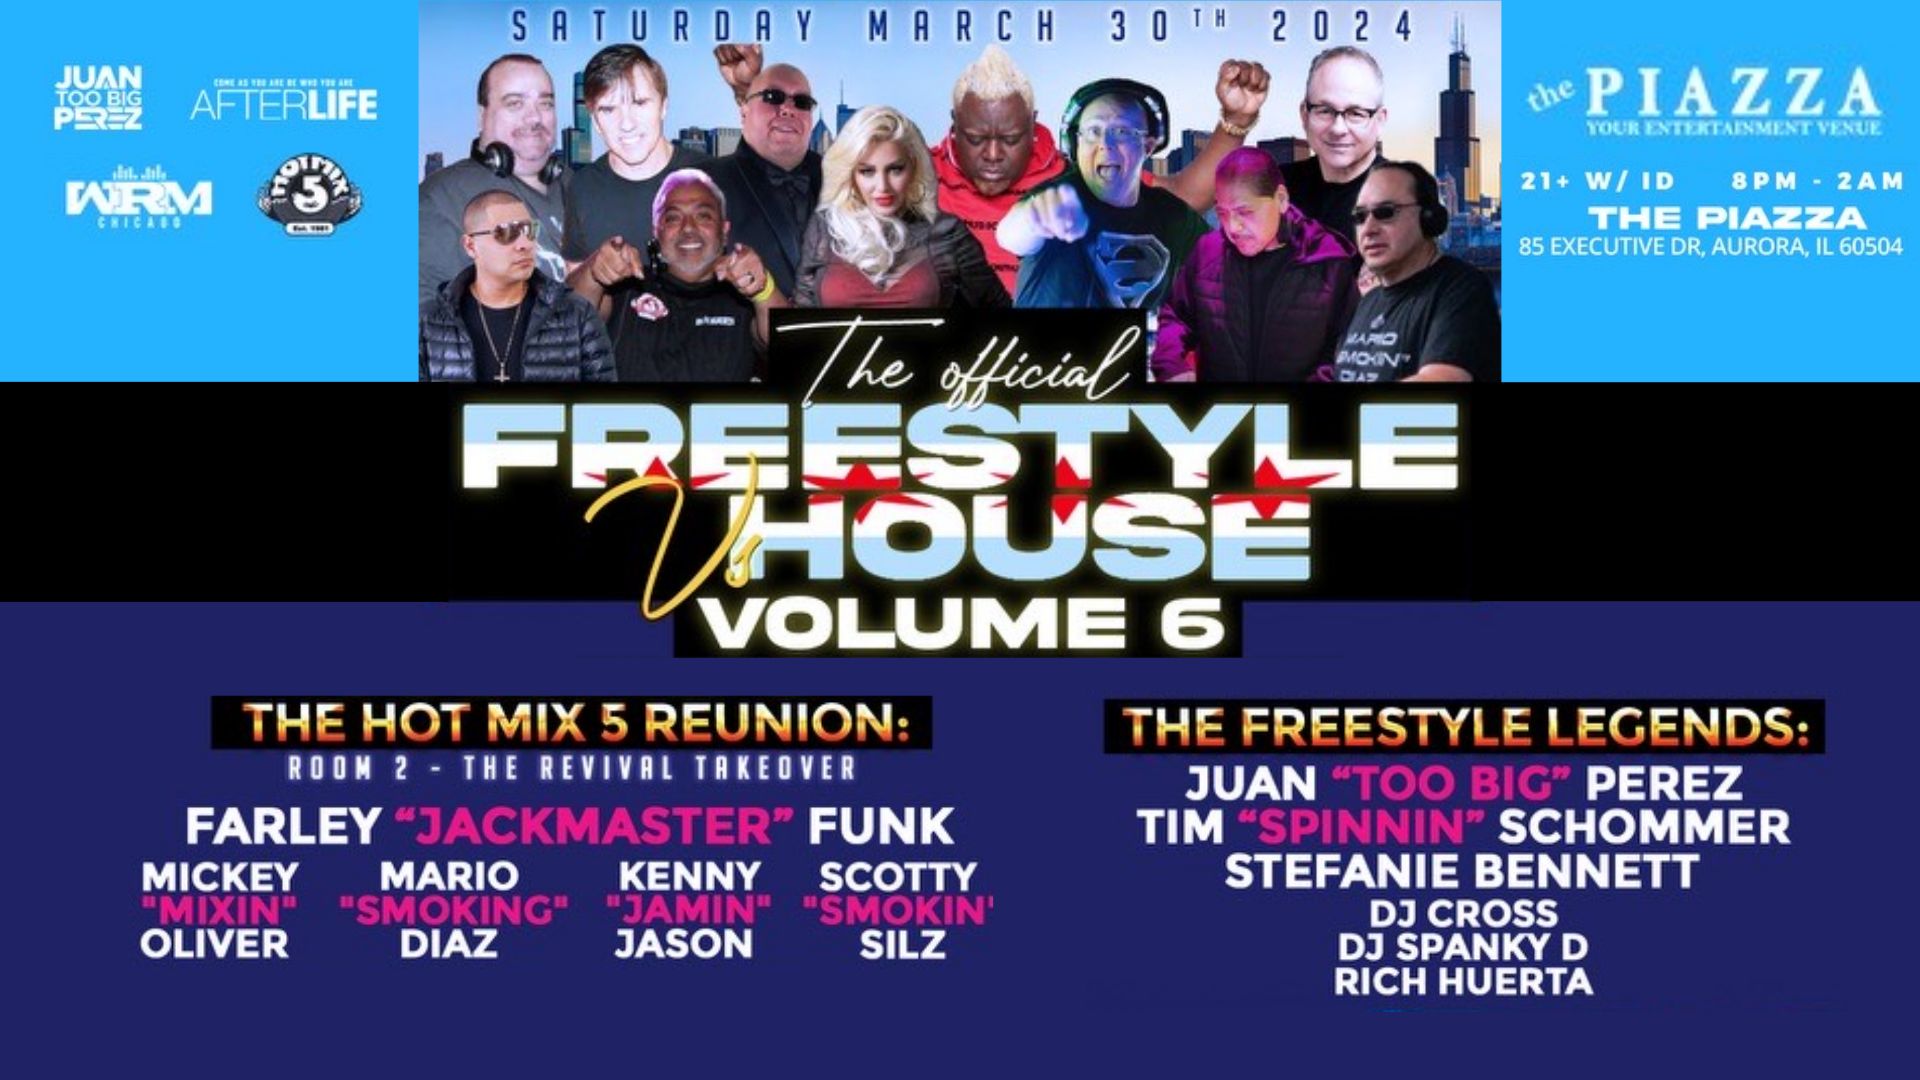 Freestyle vs House Vol 6 at The Piazza - #Afterlife, Aurora, Illinois, United States